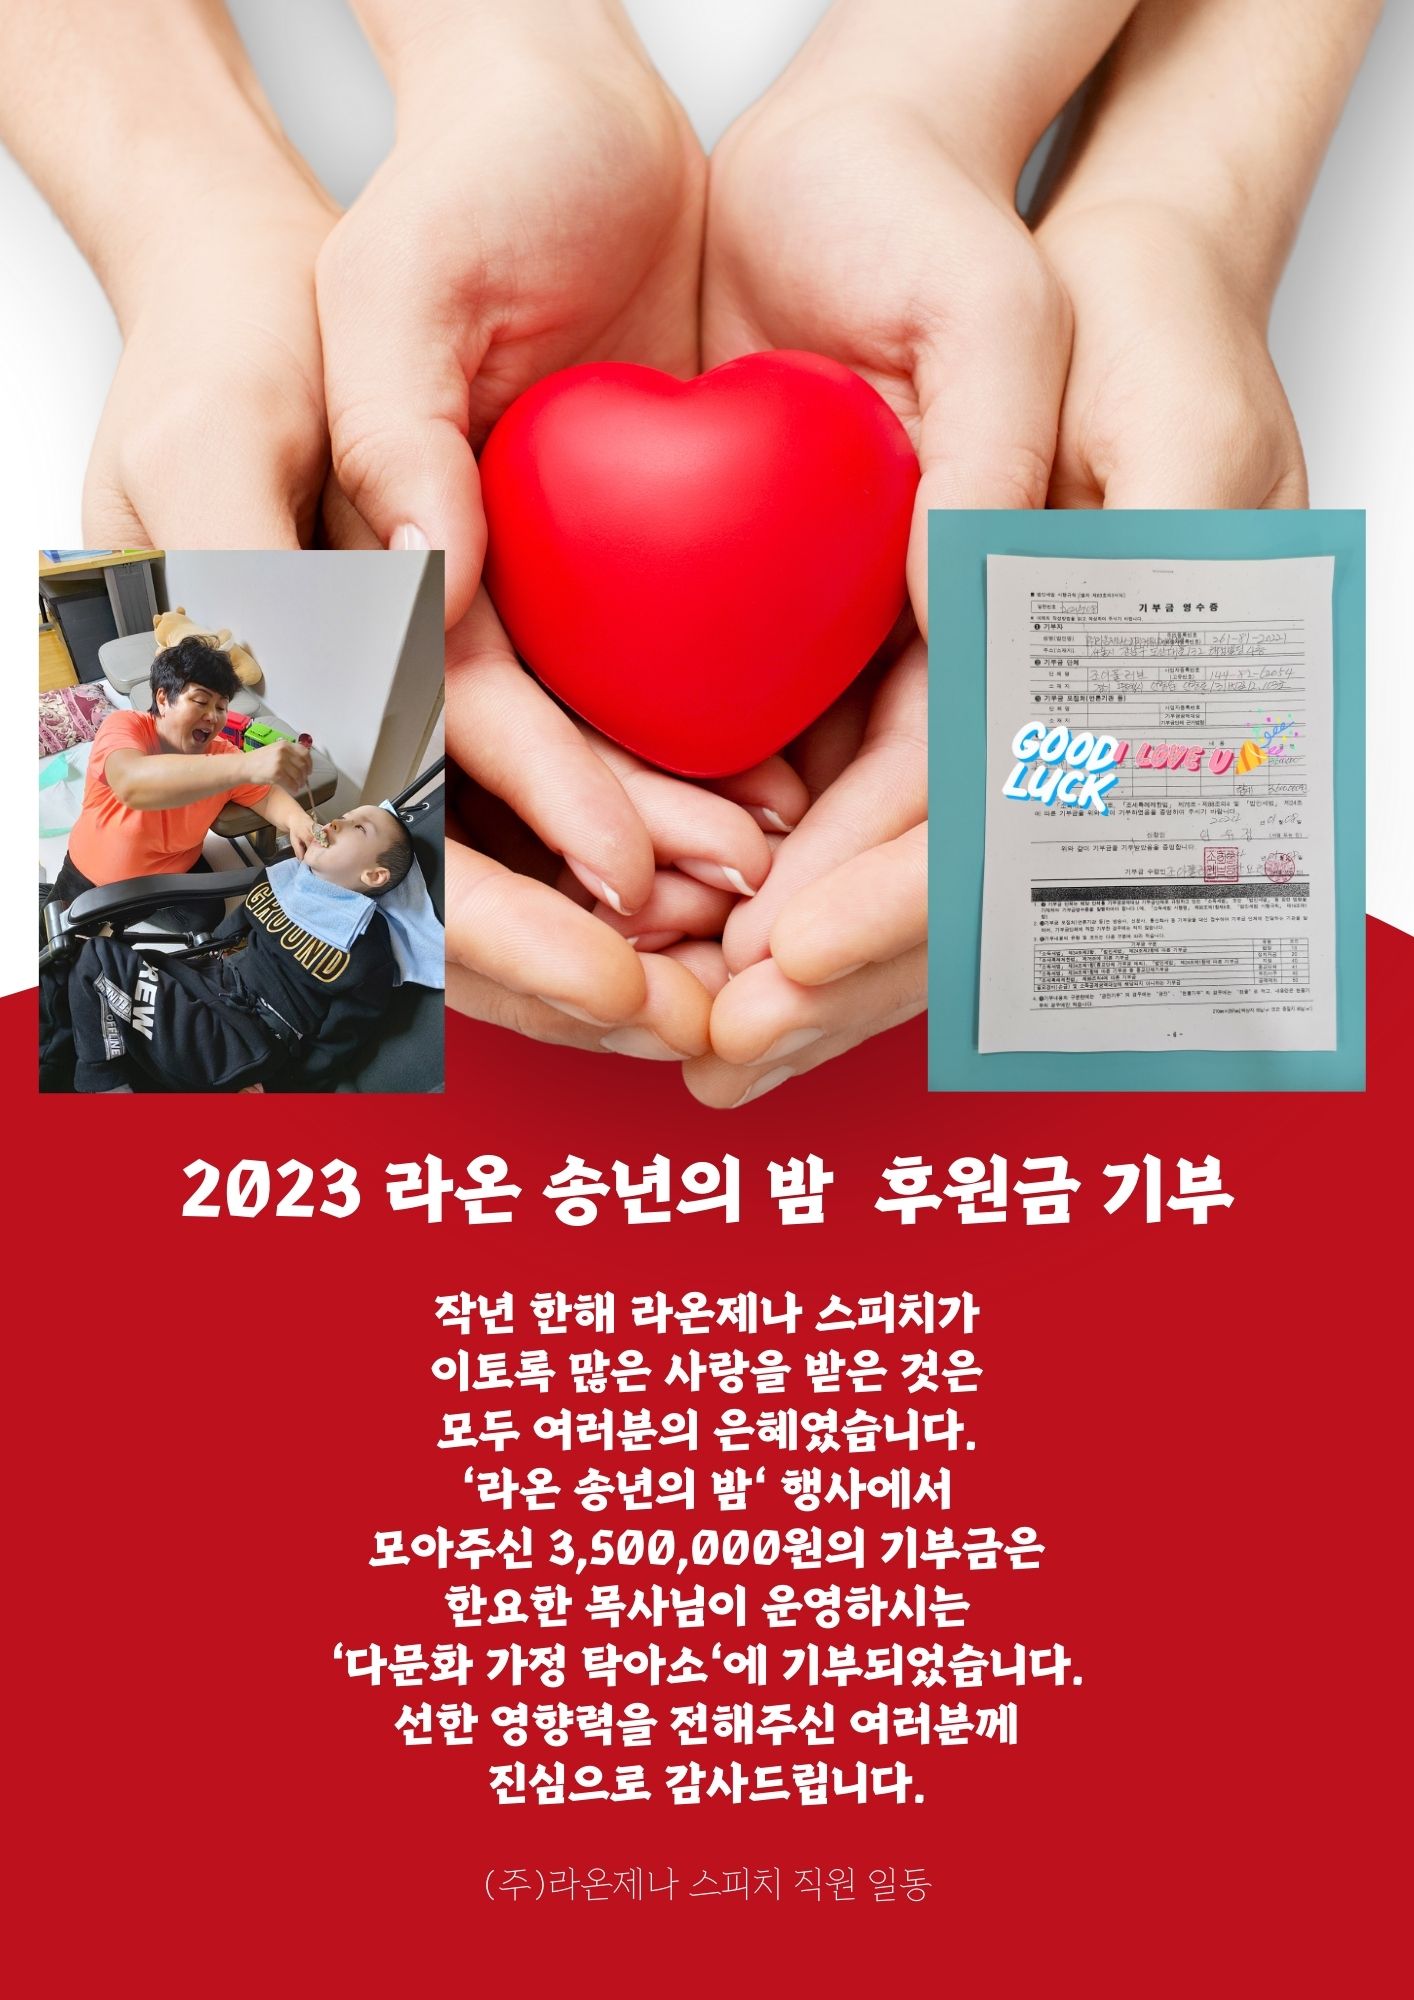 Red White Blood Donation Day Flyer.jpg